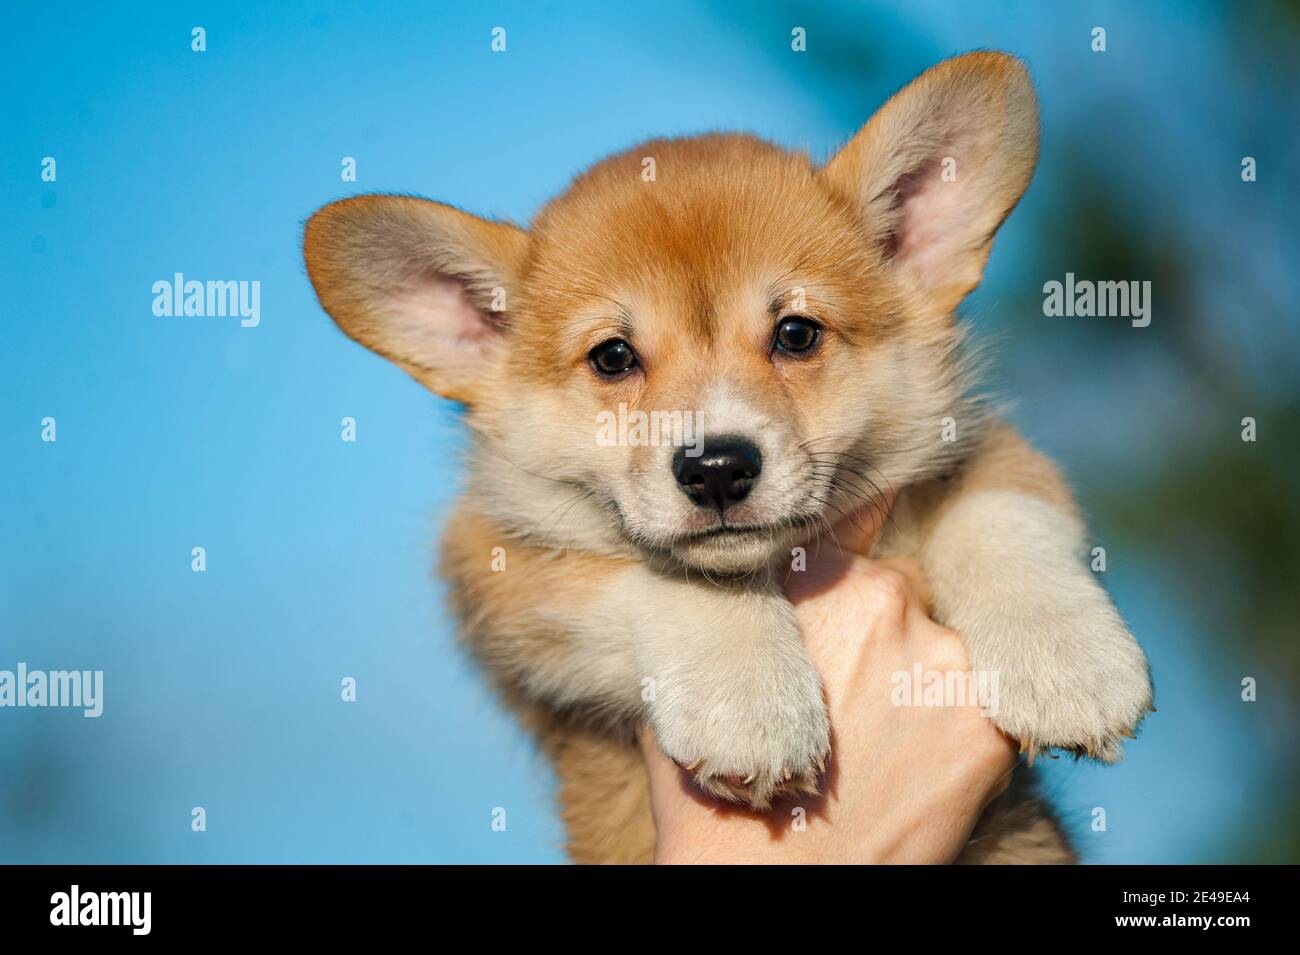 Cute corgi puppy in human's hands against the sunny blue skies background Stock Photo